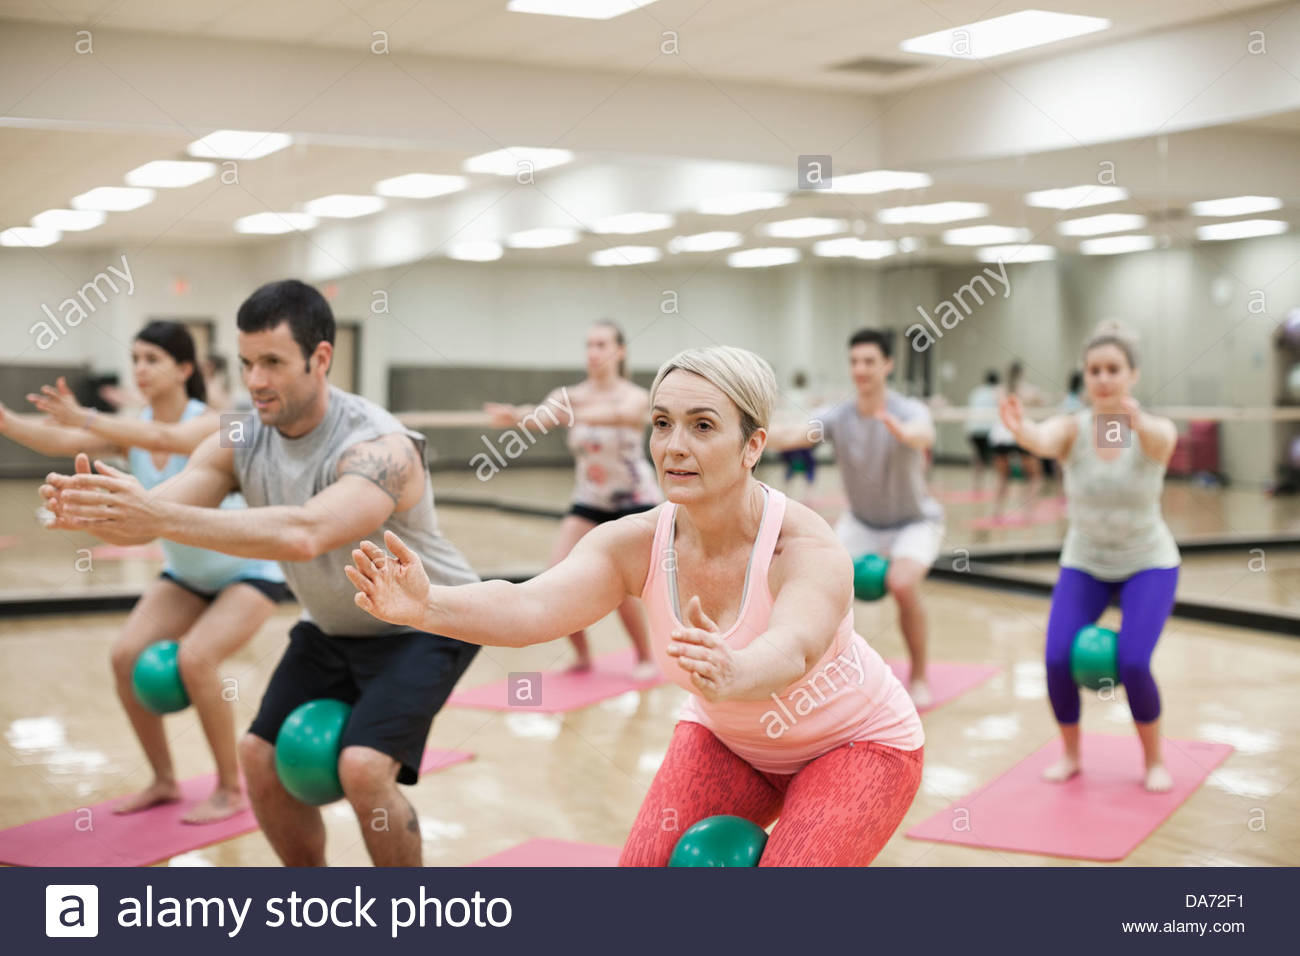 Group of people exercising in fitness class Stock Photo